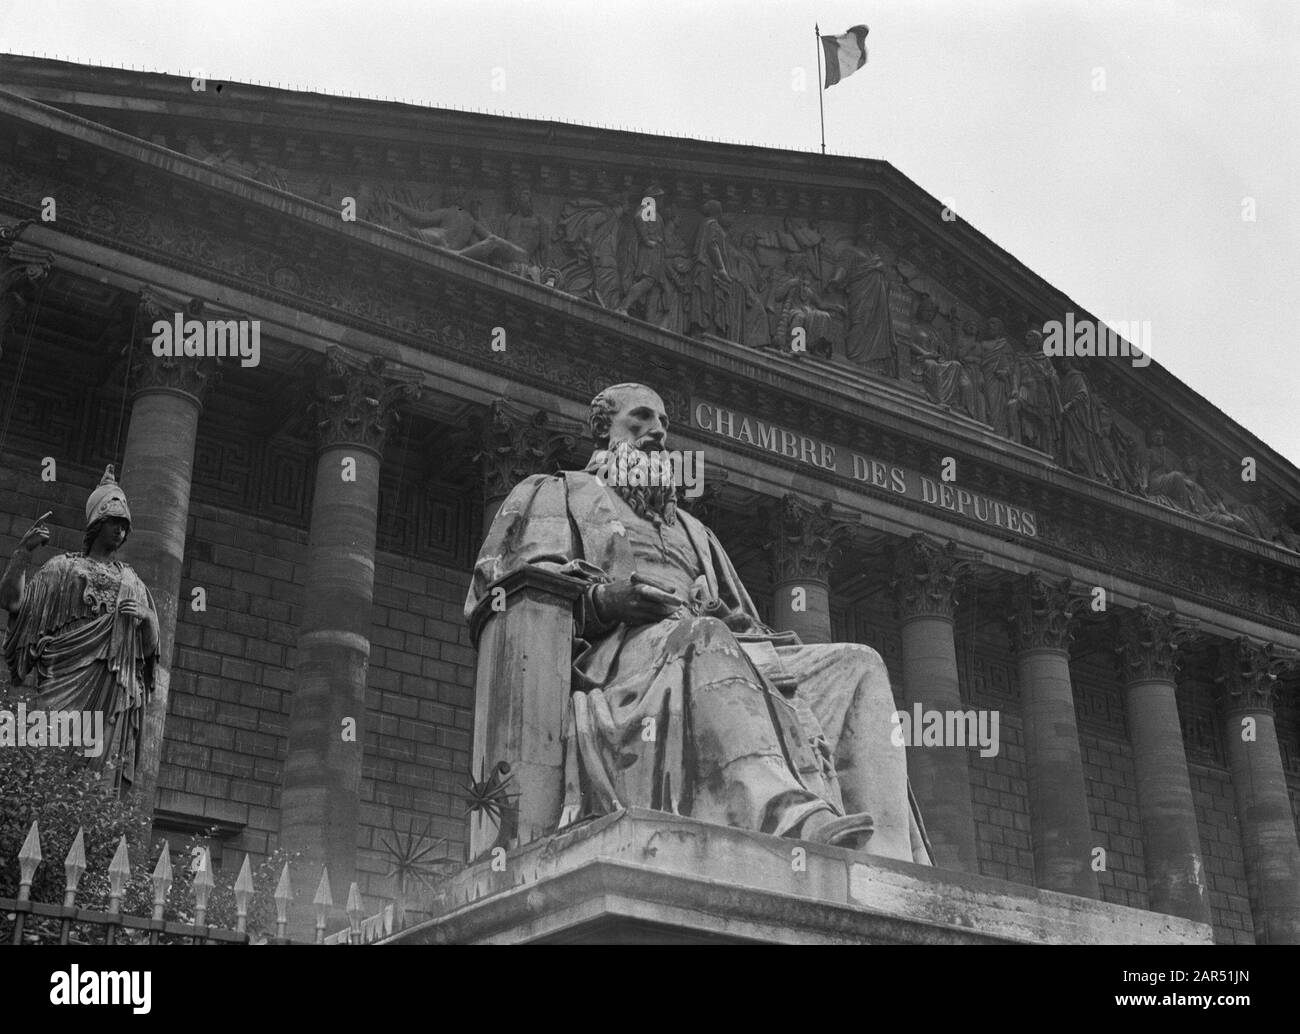 Reportage Paris  Facade of the French parliament building Annotation: Since 1827 the House of the French Parliament has been sitting here. Until 1946 under the name Chambre des Deputes, then Assemblée Nationale. The statue is of one of the ministers of the French King Date: 1935 Location: France, Paris Keywords: sculptures, parliament buildings Stock Photo